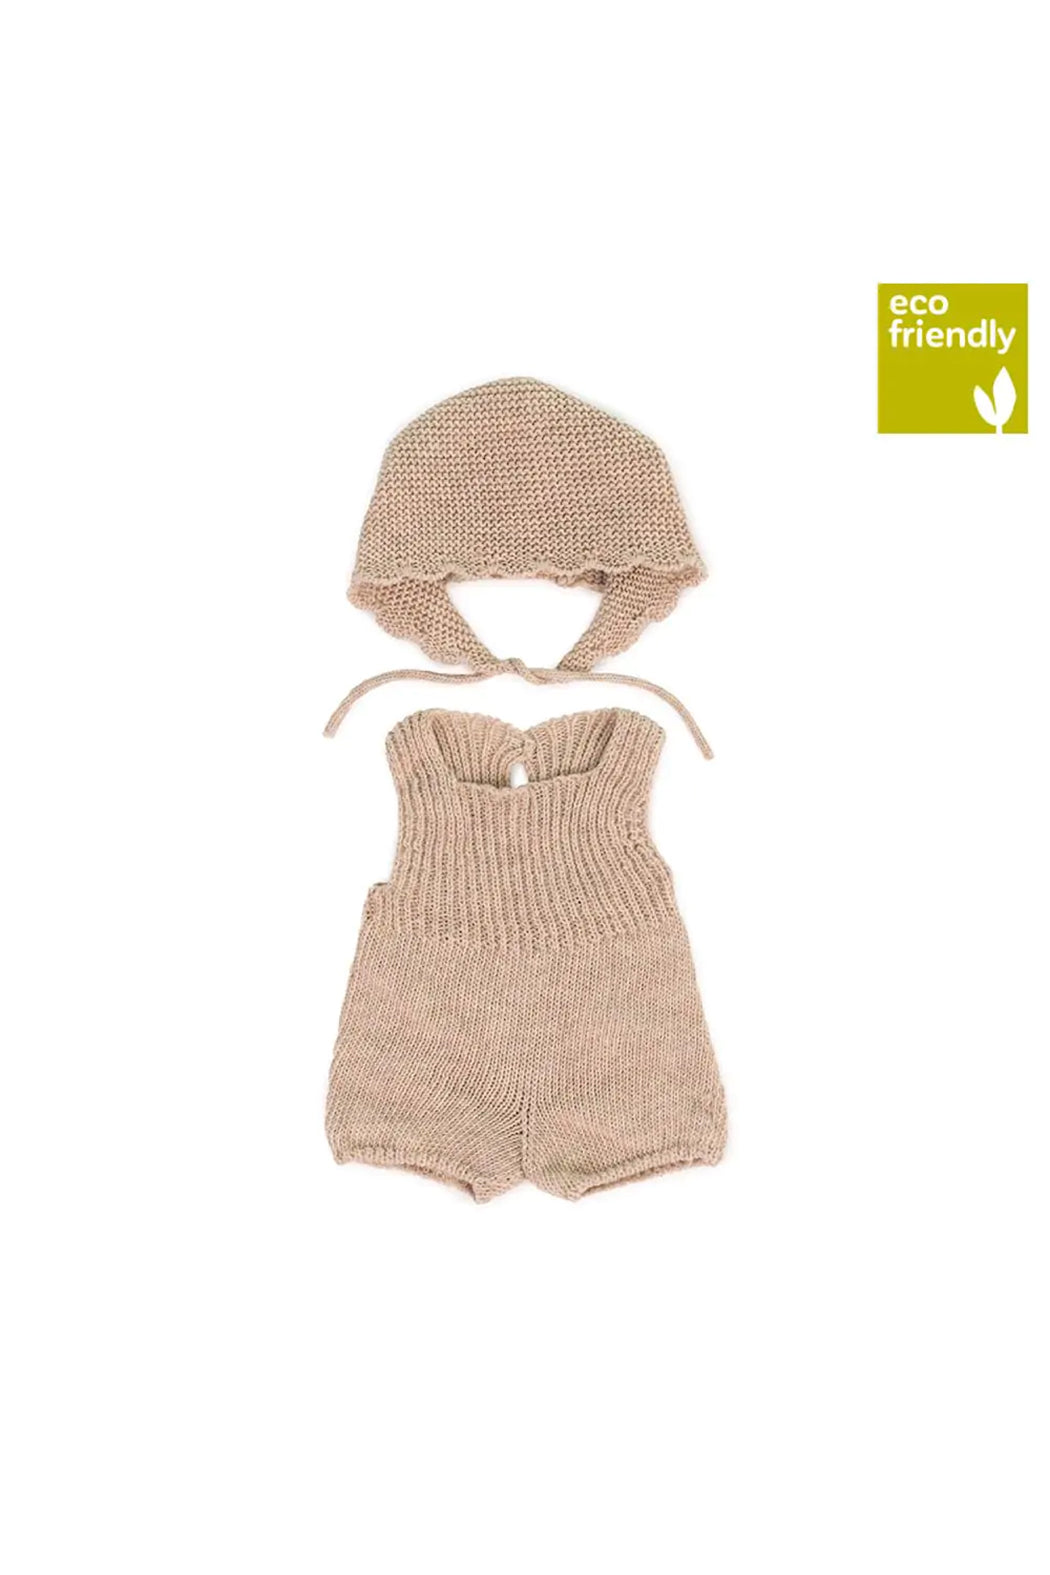 Miniland Knitted Doll Outfit 15 - Rompers & Bonnet